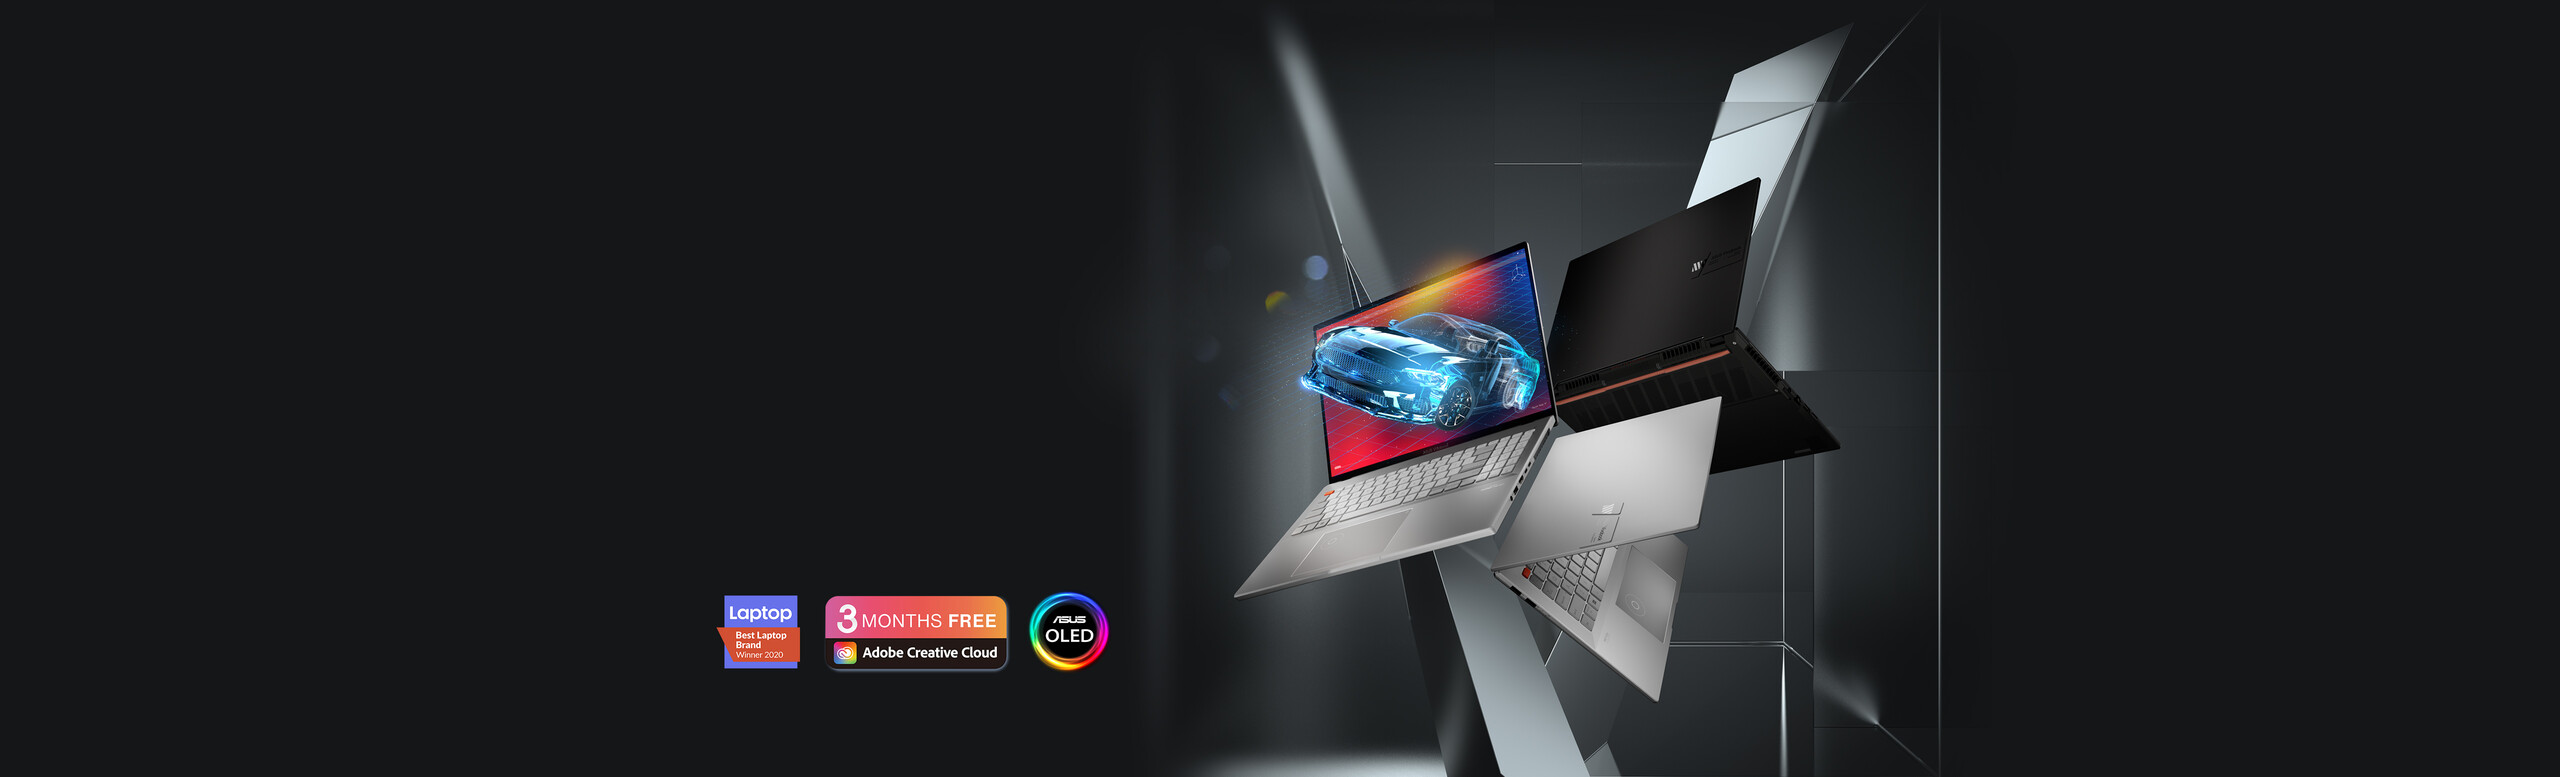 Vivobook Pro 14X/15X/16X OLED presenting its design from front and back along with a rendering car in its screen, with ASUS OLED badge, best laptop brand winner 2020 and 3 month free Adobe Creative Cloud badge.